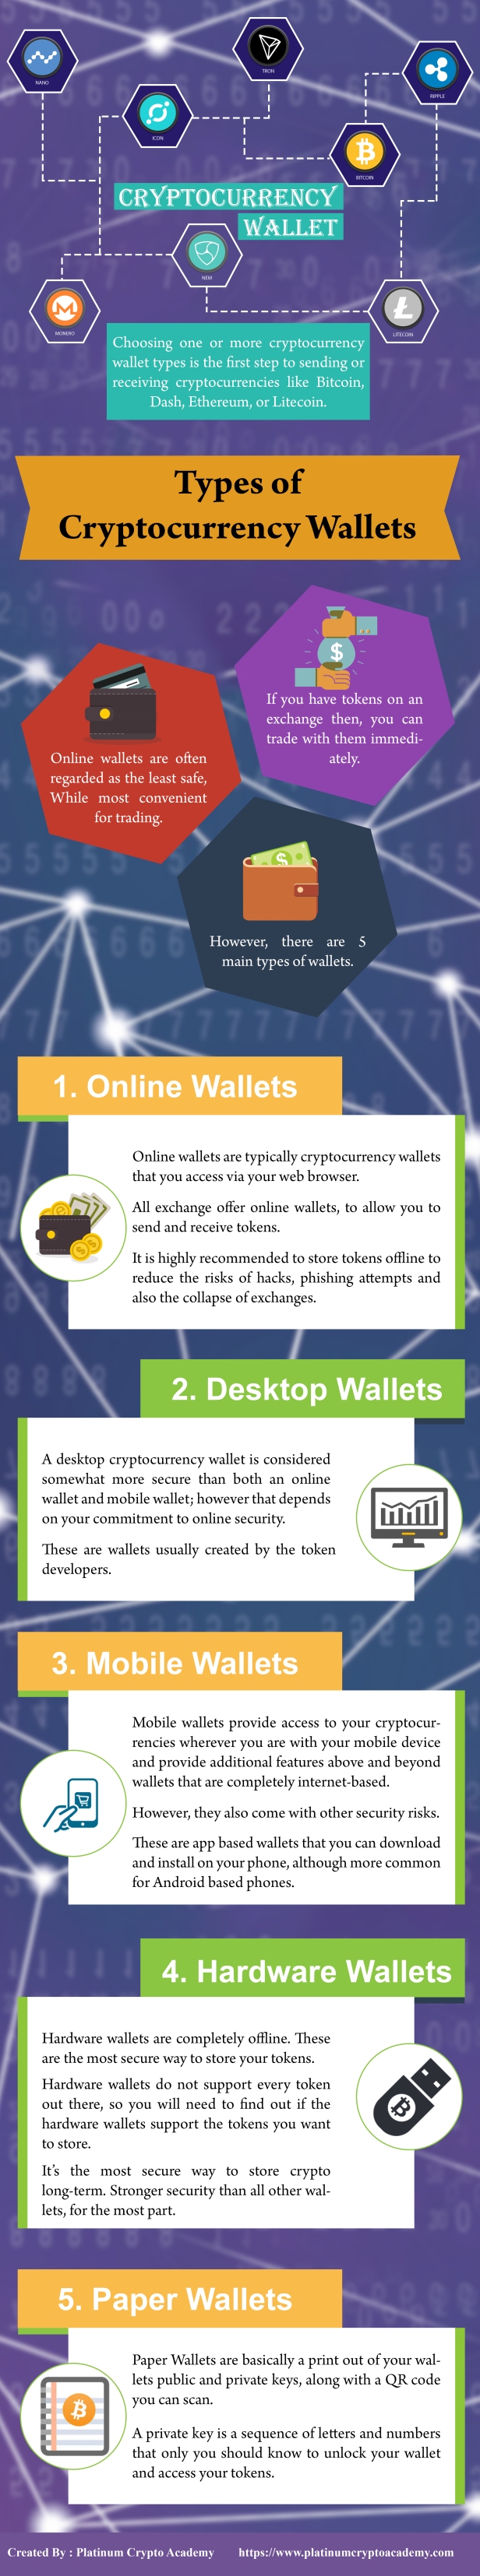 Types of Cryptocurrency Wallets